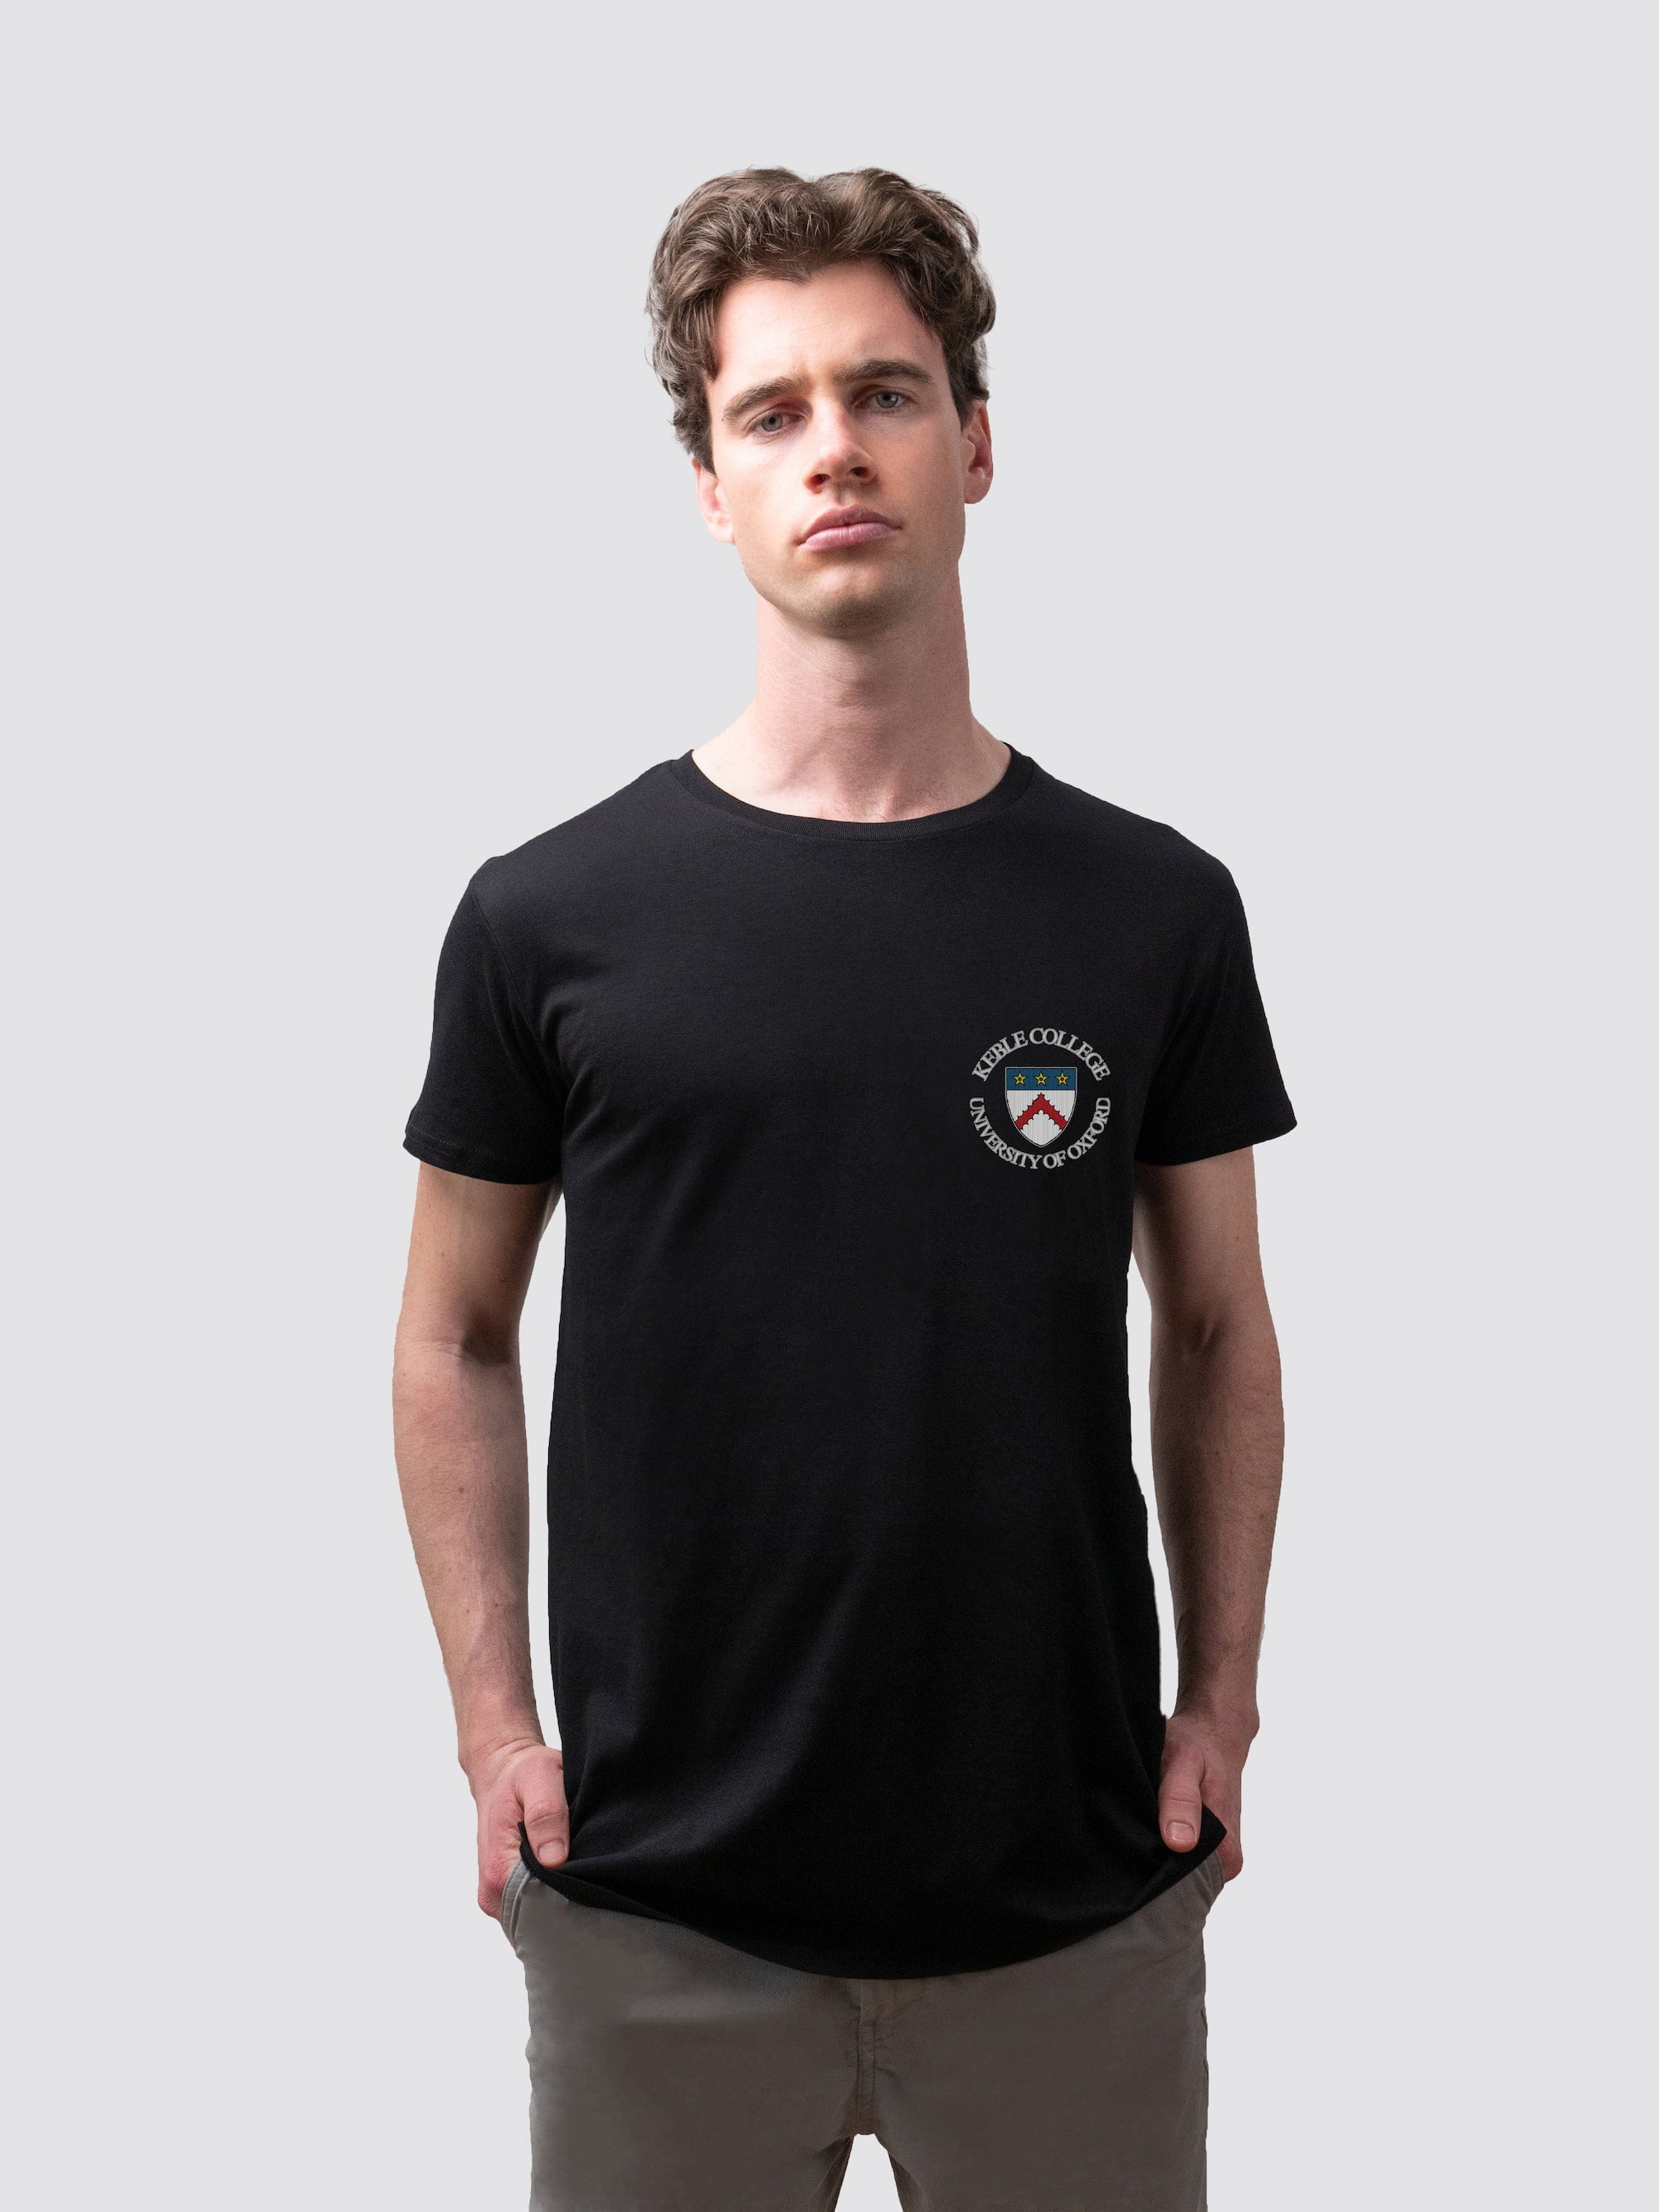 Sustainable Keble t-shirt, made from organic cotton